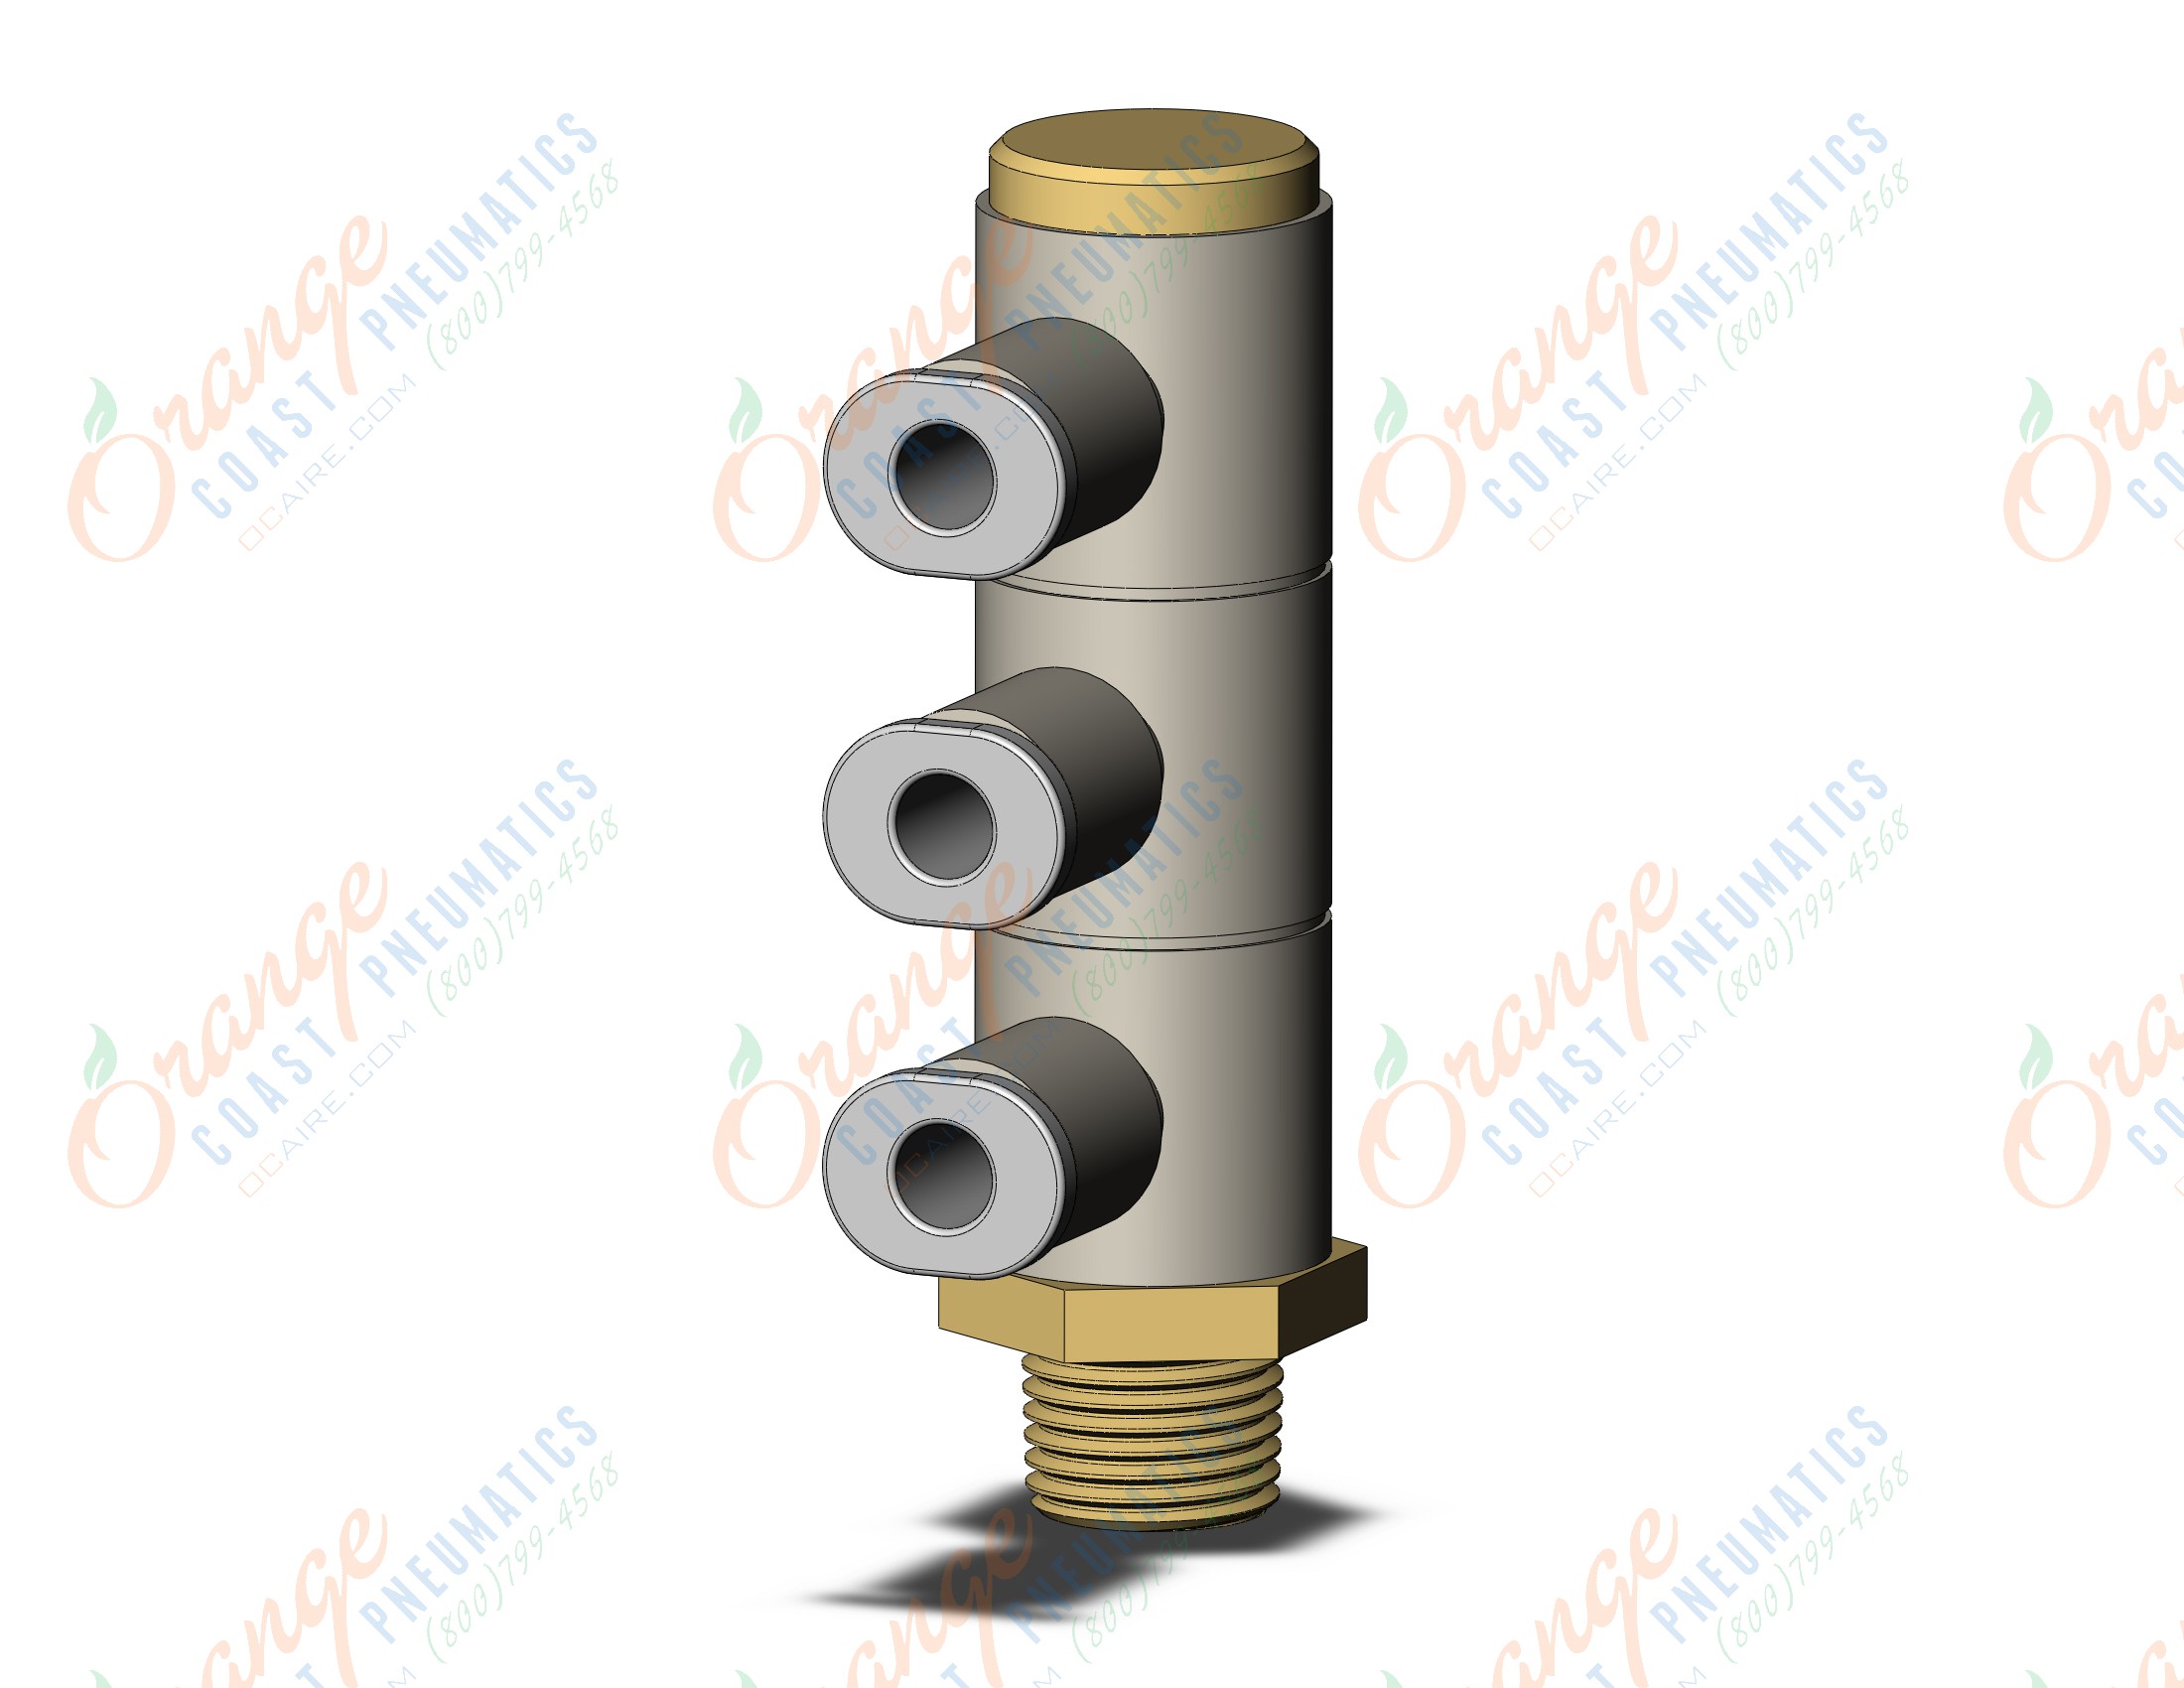 SMC KQ2VT04-01AS1 fitting, trpl uni male elbow, KQ2 FITTING (sold in packages of 10; price is per piece)